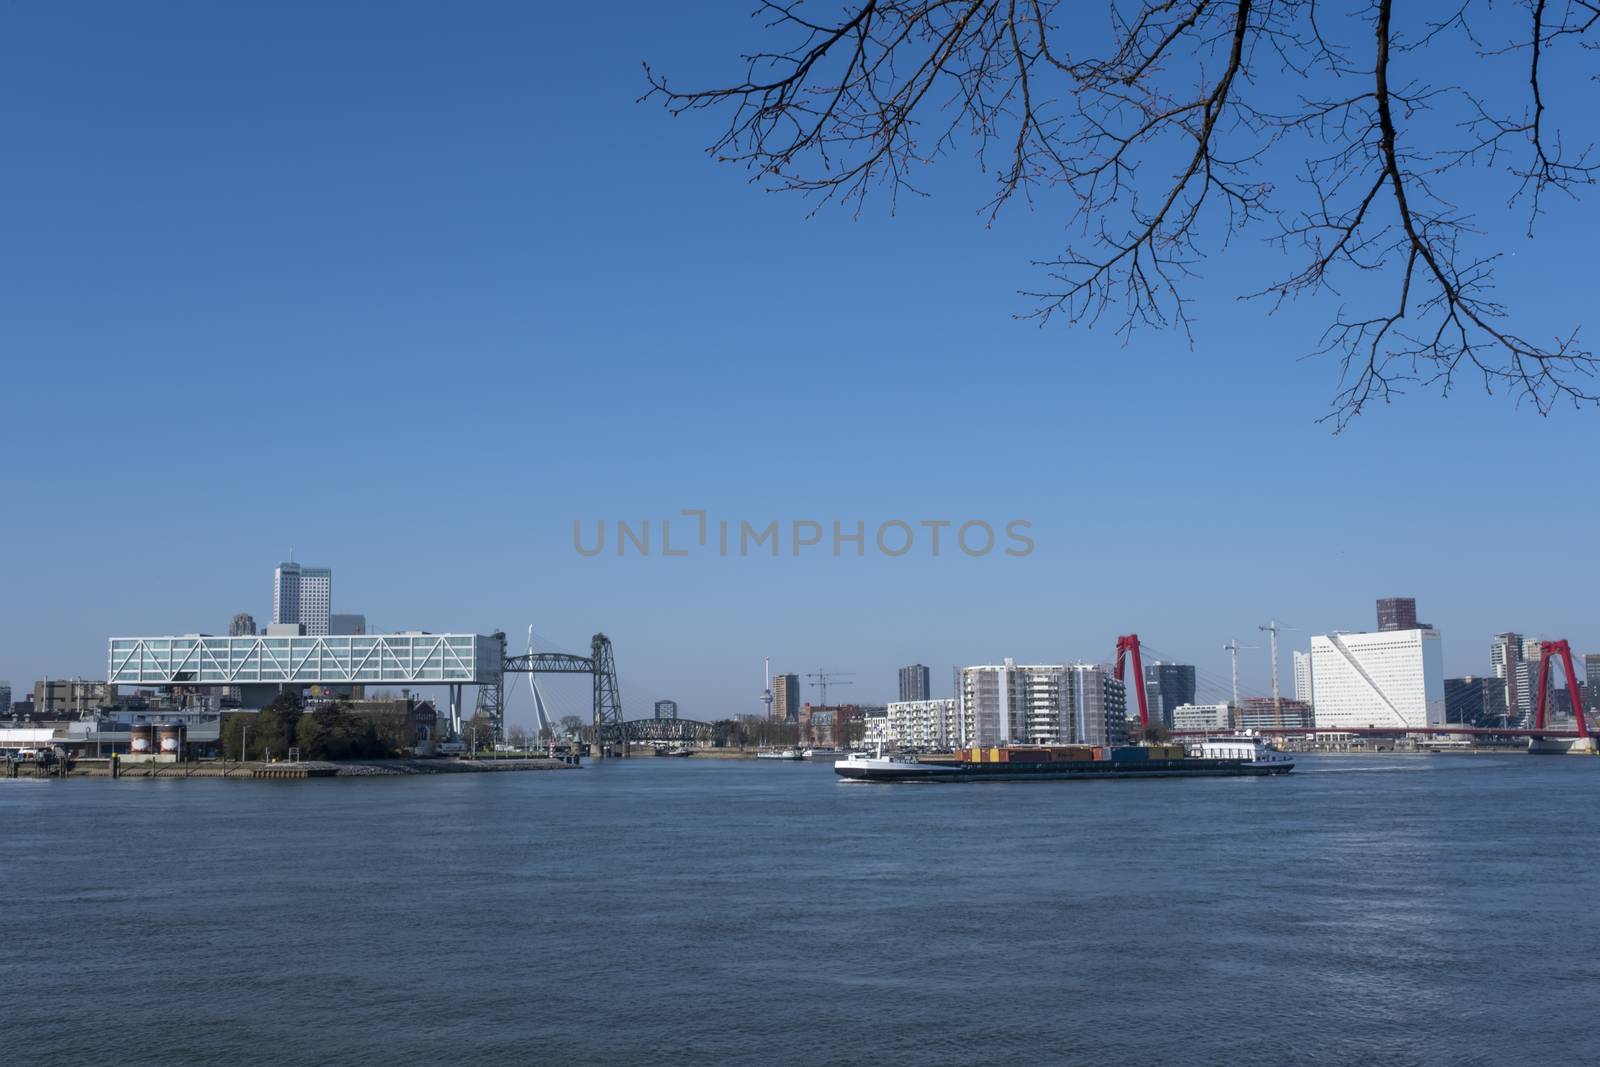 panoramic view of the Erasmus bridge in the city and buildings o by Tjeerdkruse